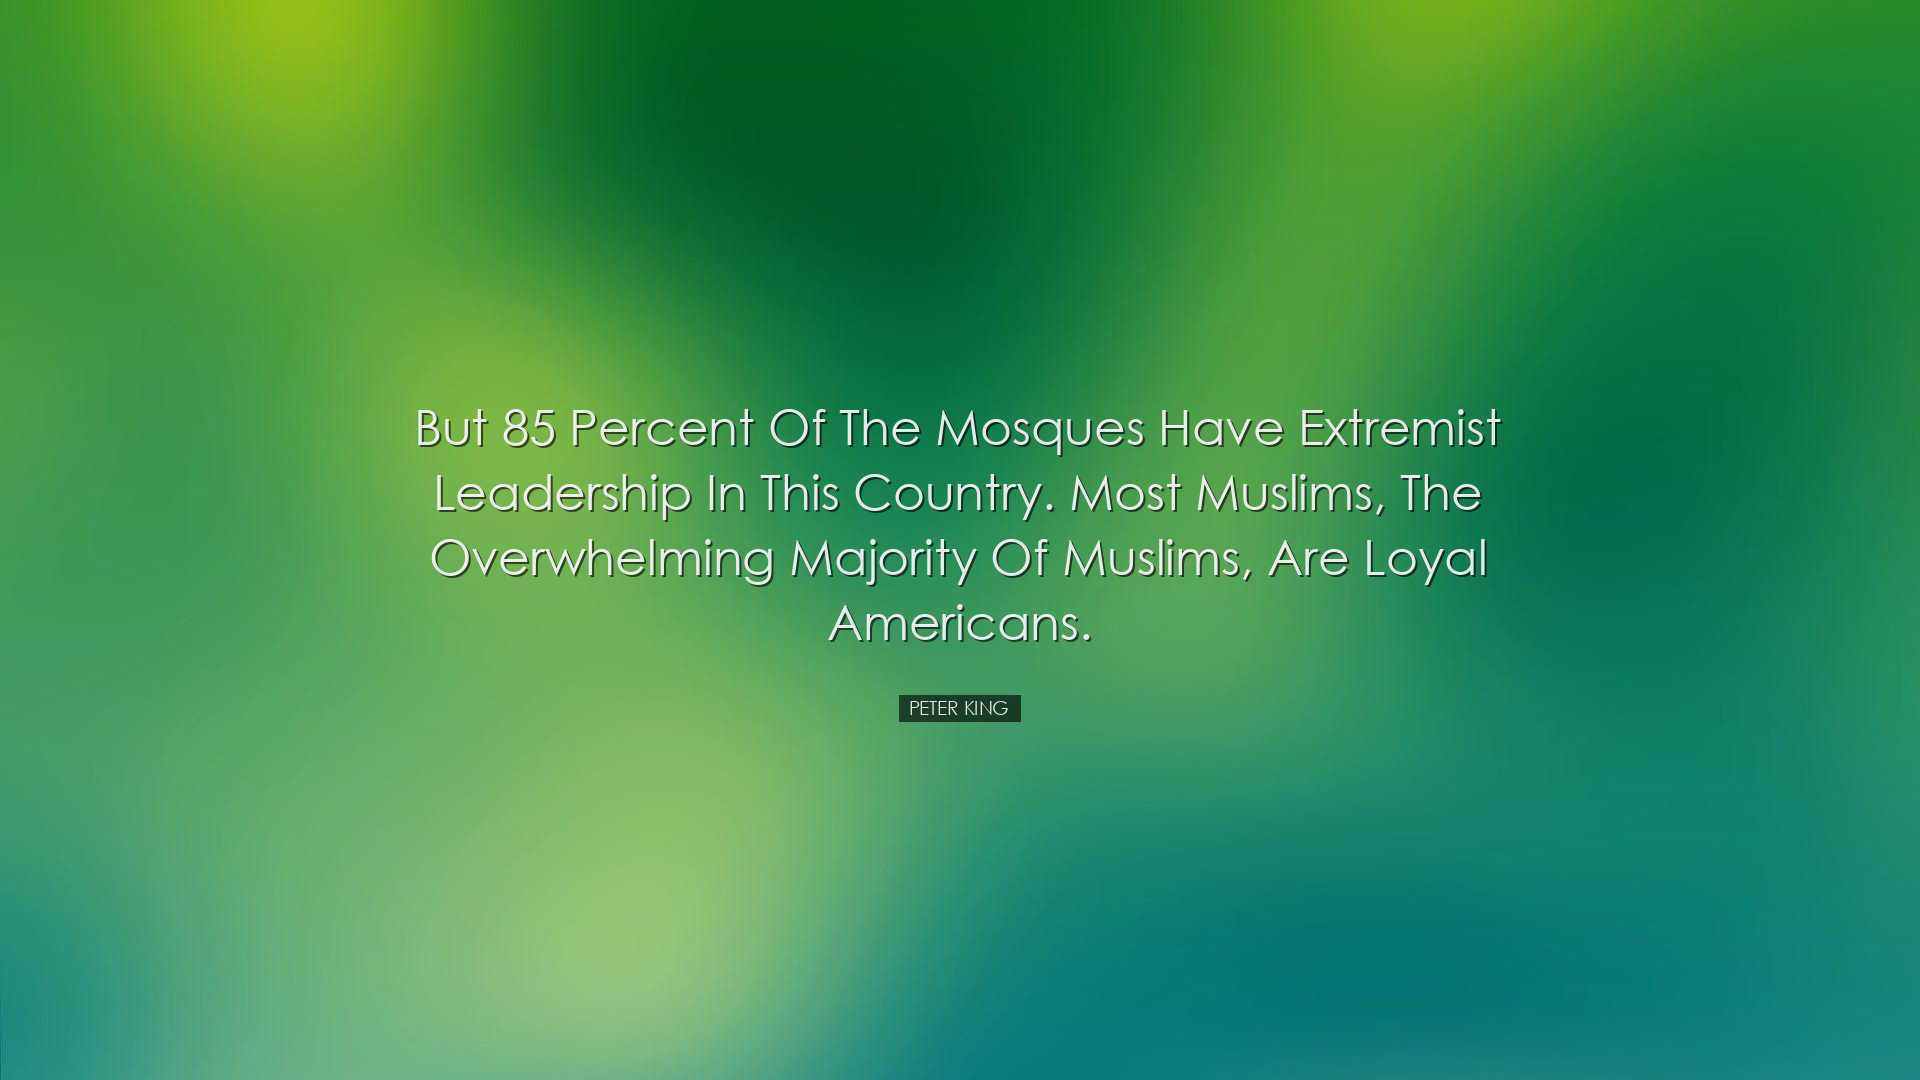 But 85 percent of the mosques have extremist leadership in this co